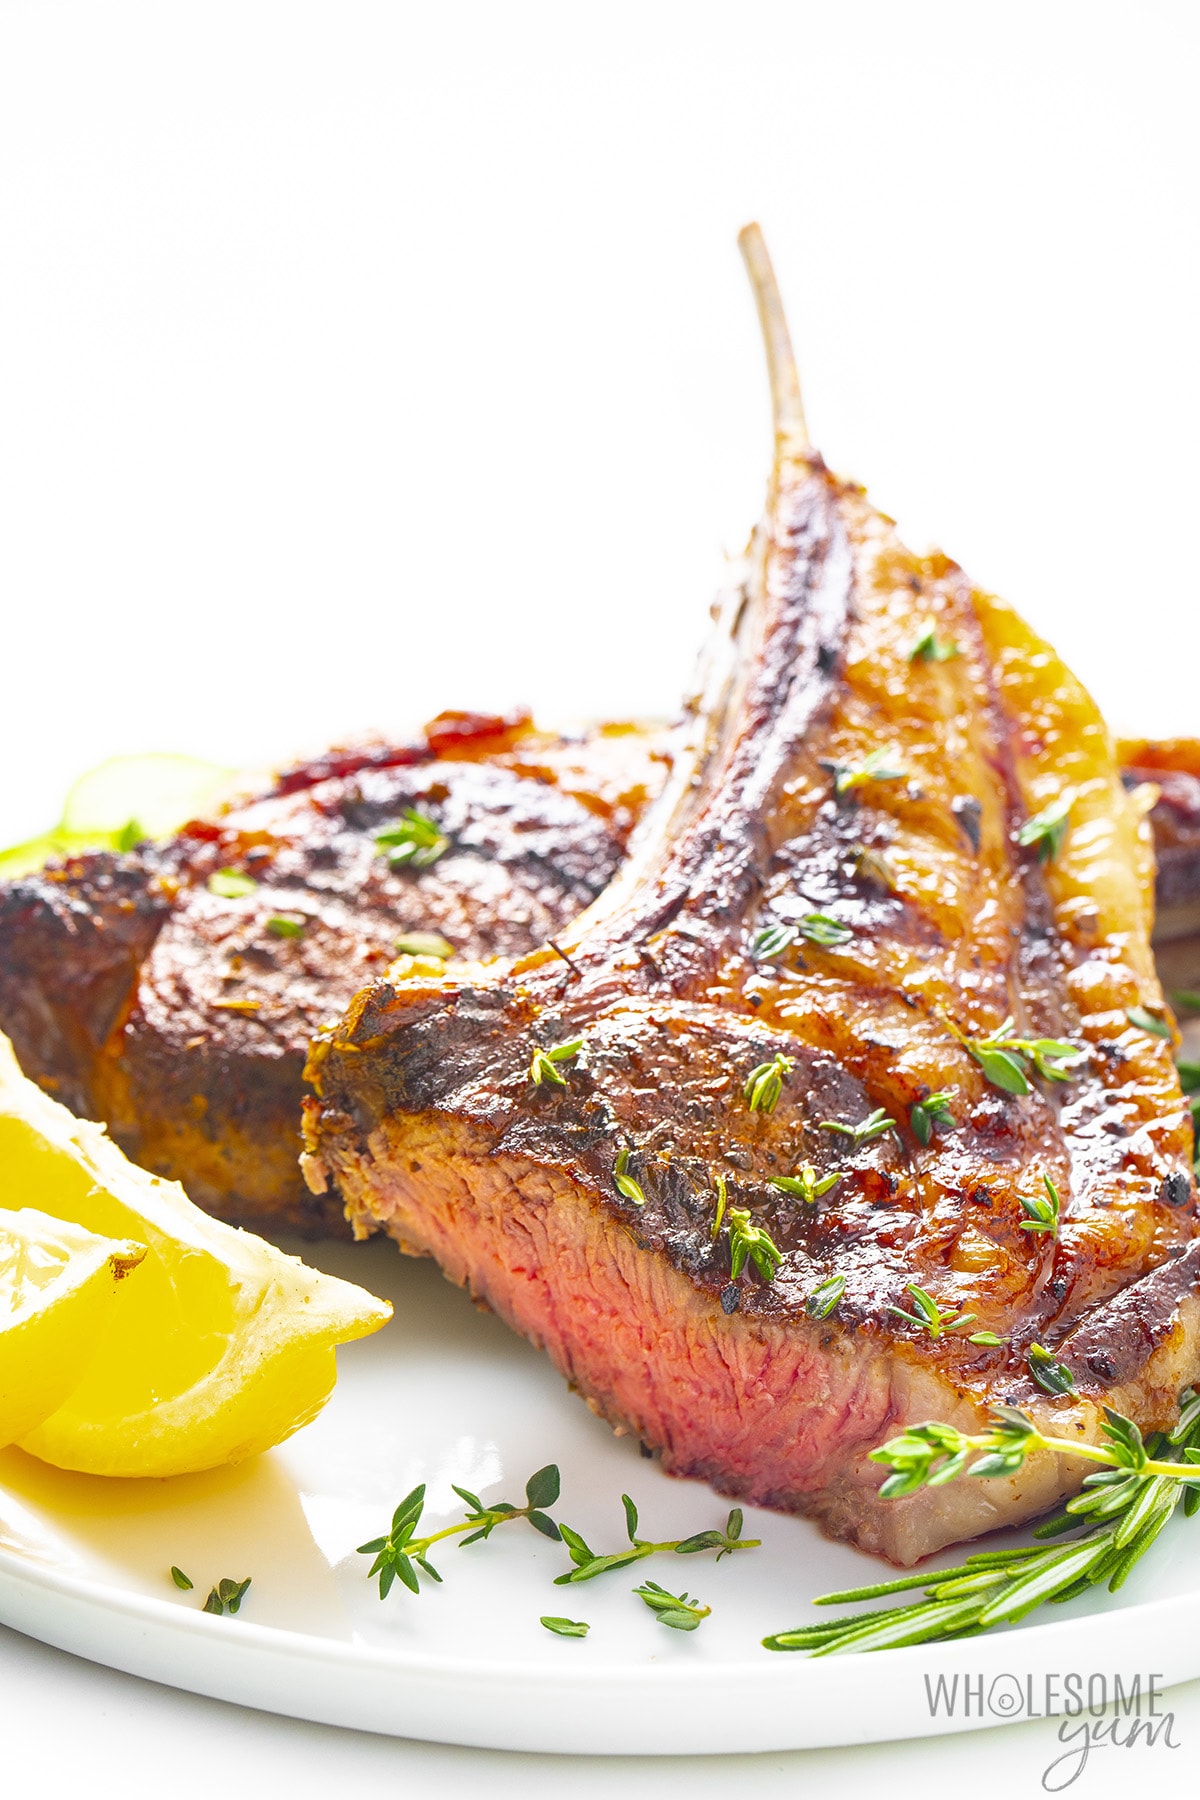 Oven lamb chops on a plate with a slice cut off to show the inside.